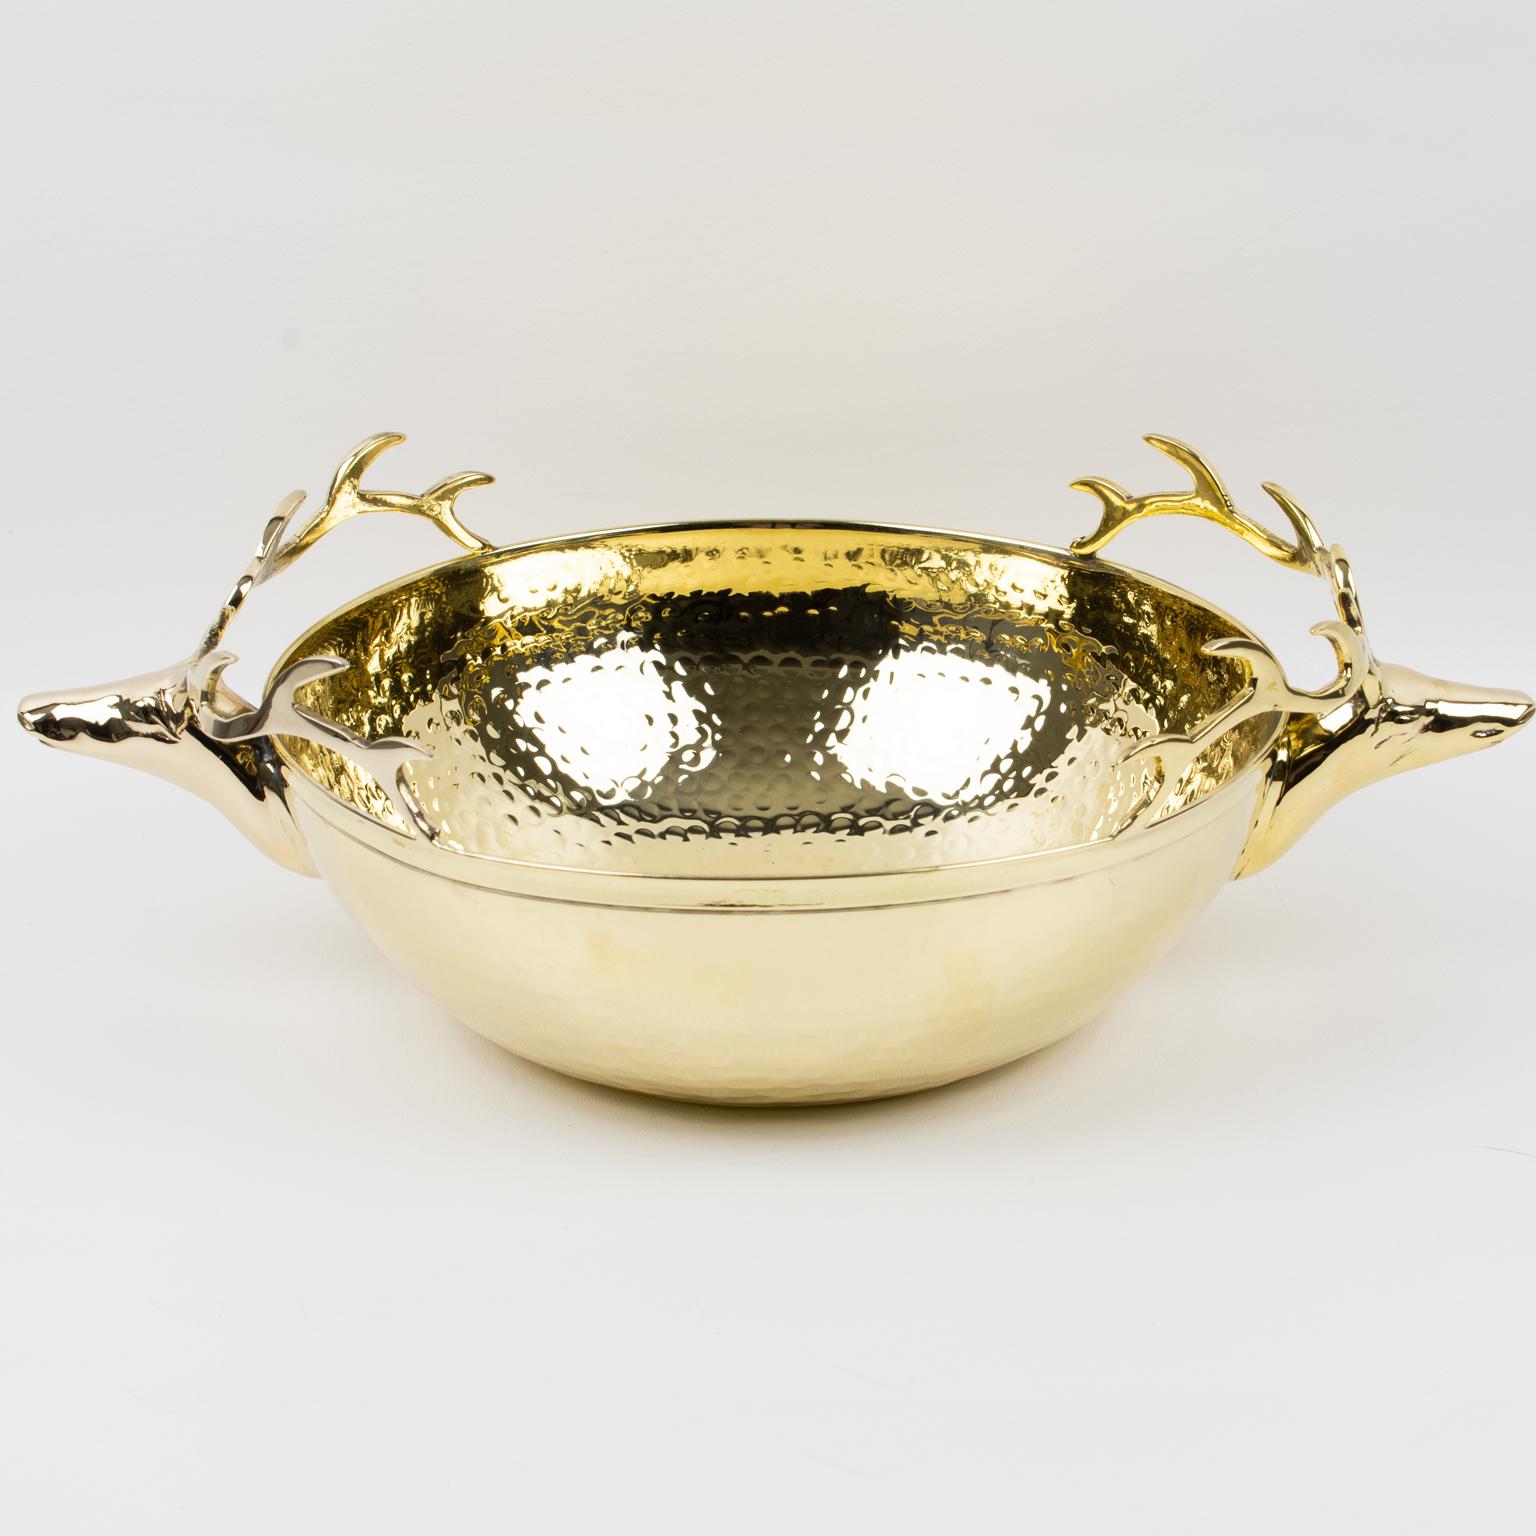 This elegant Italian 1980s polished brass decorative bowl or centerpiece features an important dimensional shape with a lightly hammered texture inside and out, and two large stag heads serve as handles. There is no visible maker's mark.
The